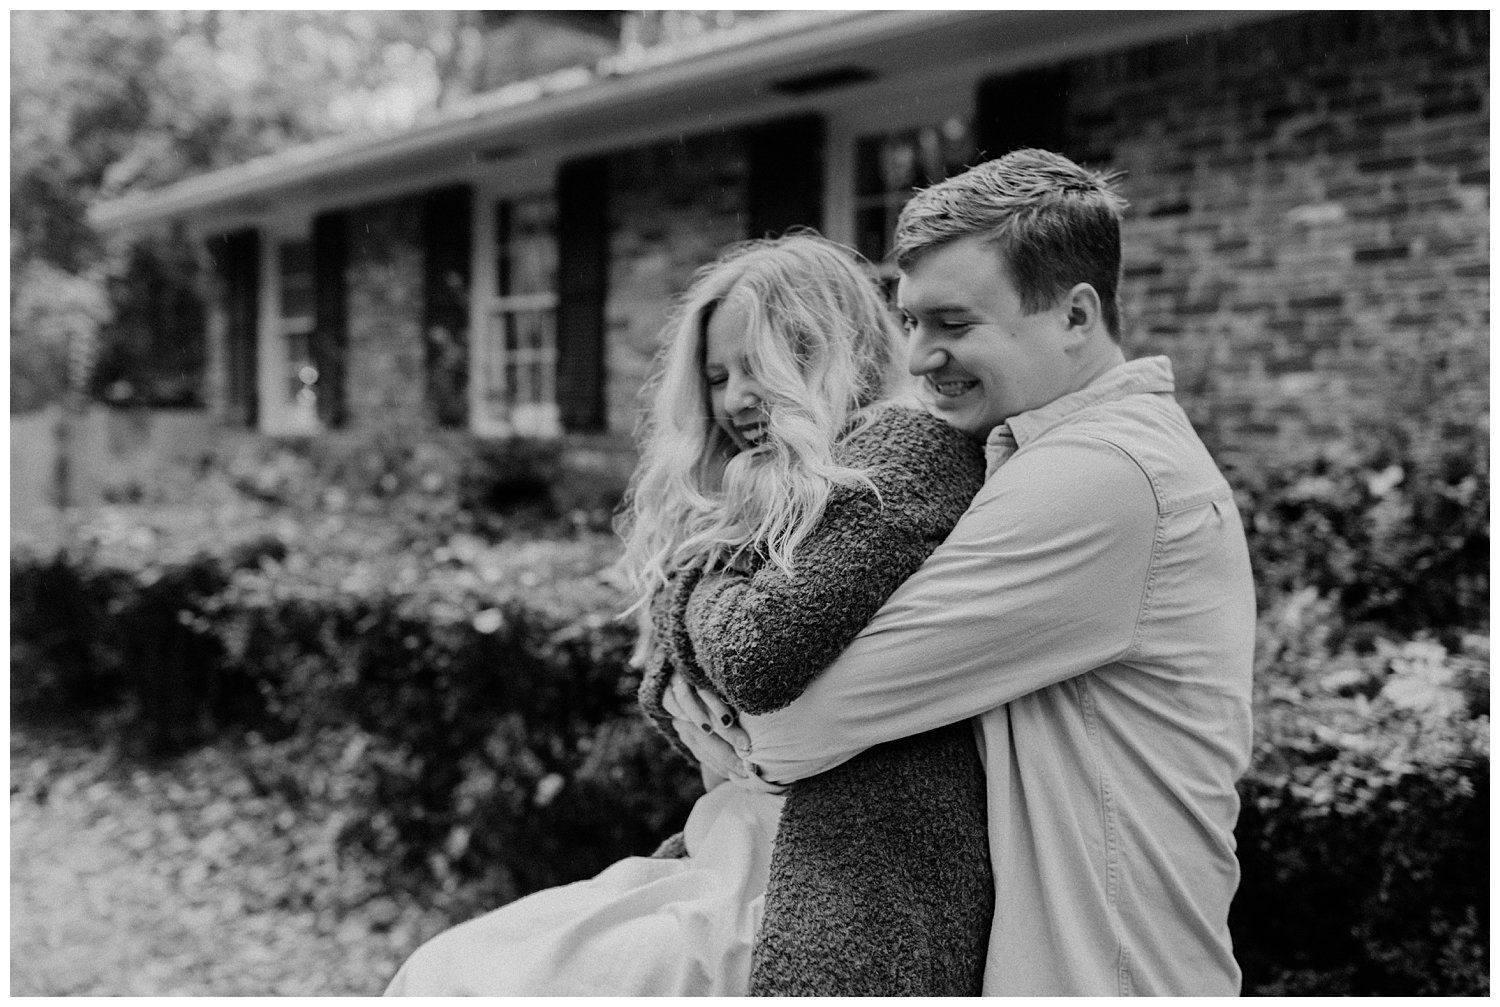 Rainy Day Engagement Session in Marietta, Georgia with cute couple laughing in the rain